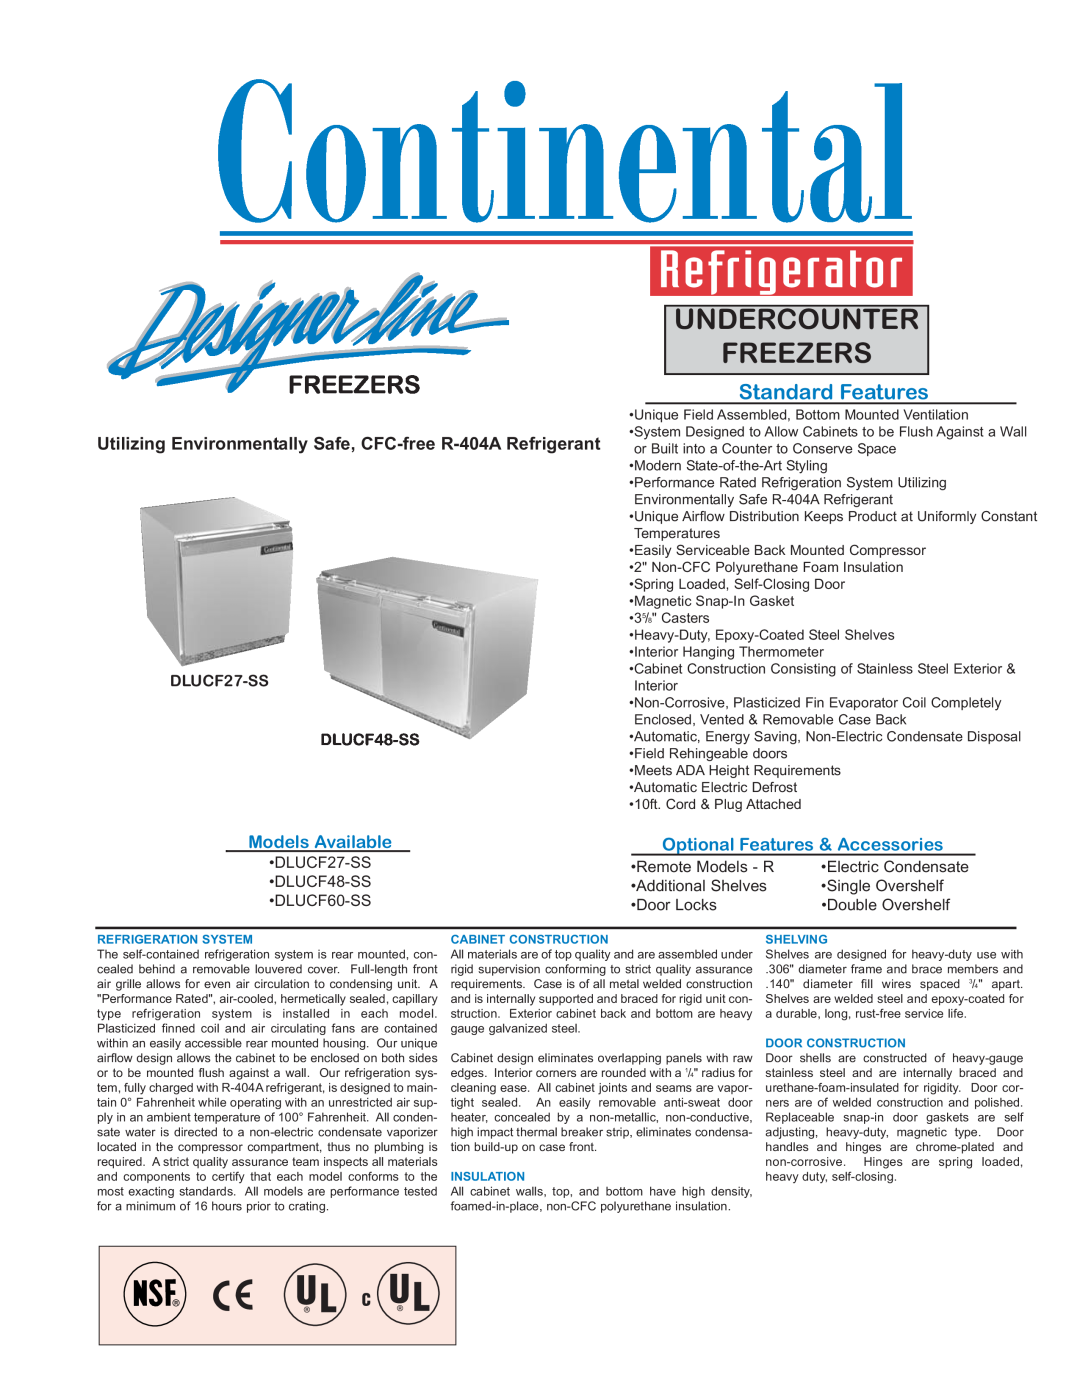 Continental Refrigerator DLUCF27-SS manual Undercounter Freezers, Standard Features, Models Available, Remote Models - R 